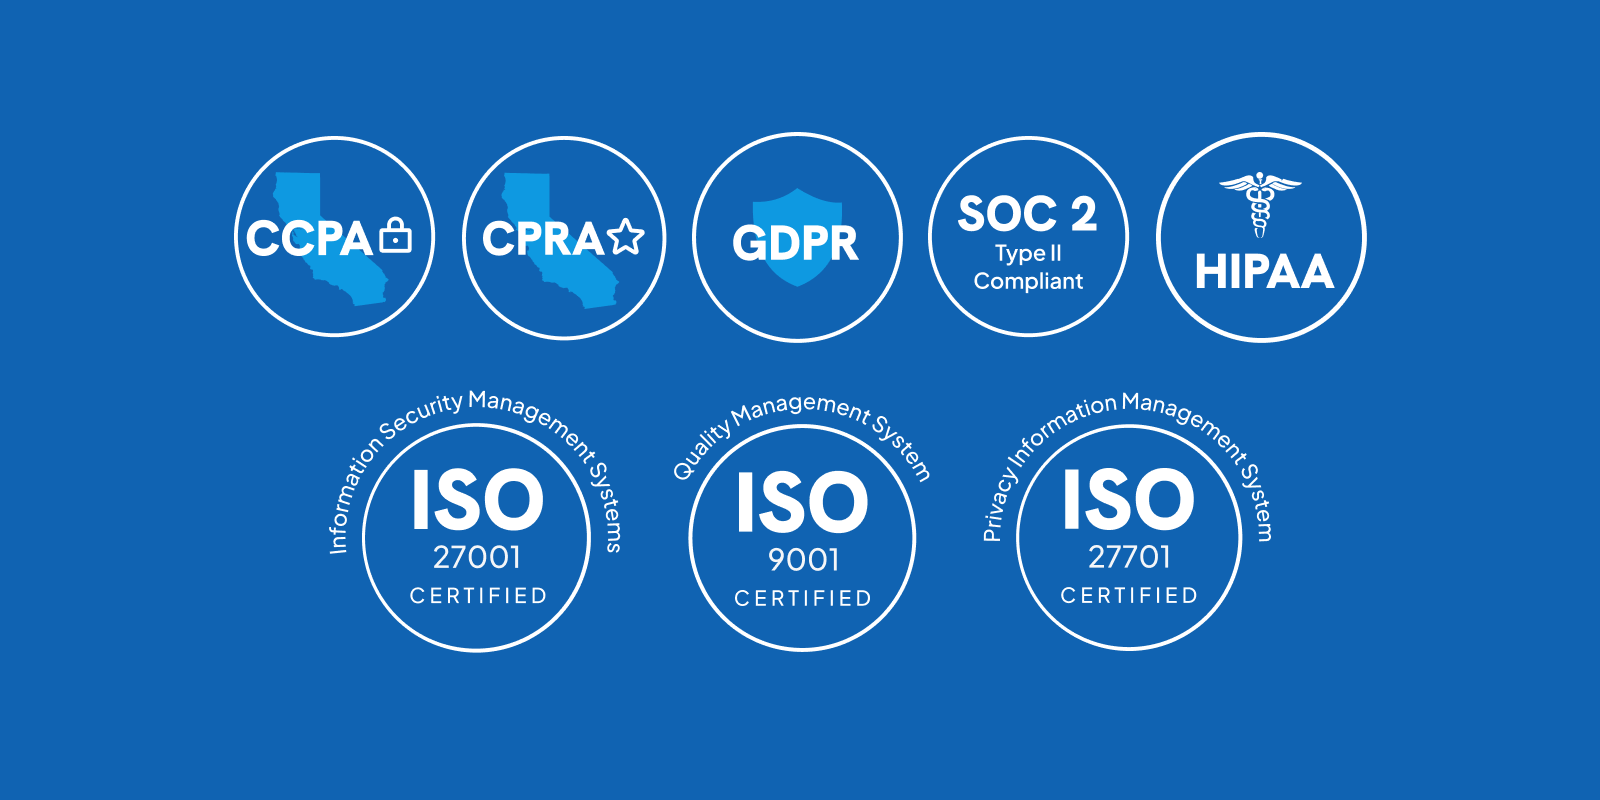 Secure and Compliant with SOC2 2, GDPR, HIPAA, ISO 27001, and CCPA